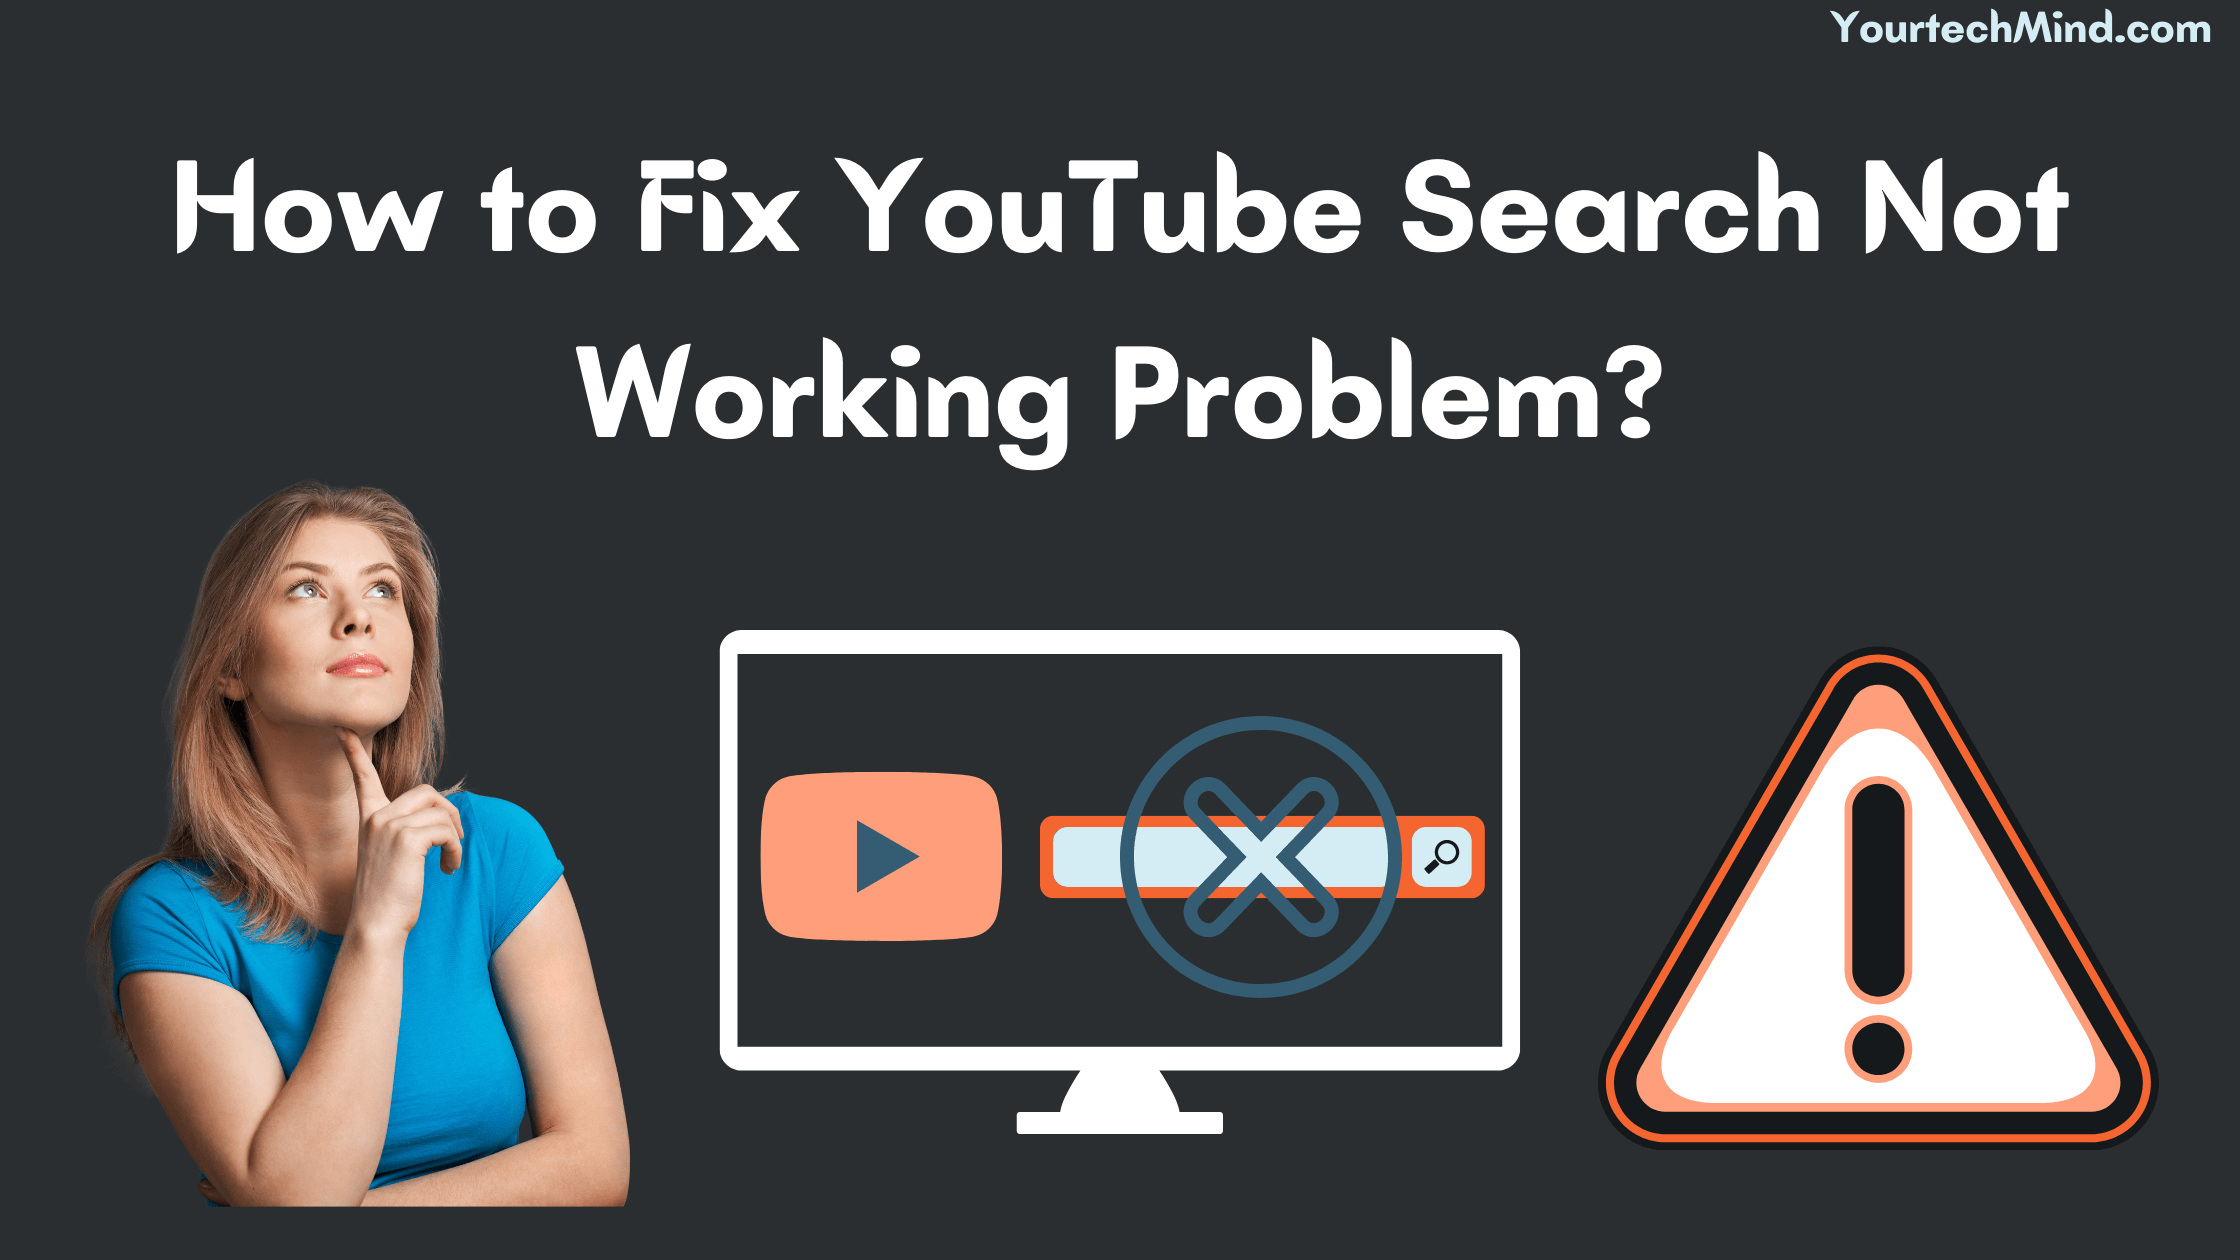 How to Fix YouTube Search Not Working Problem?